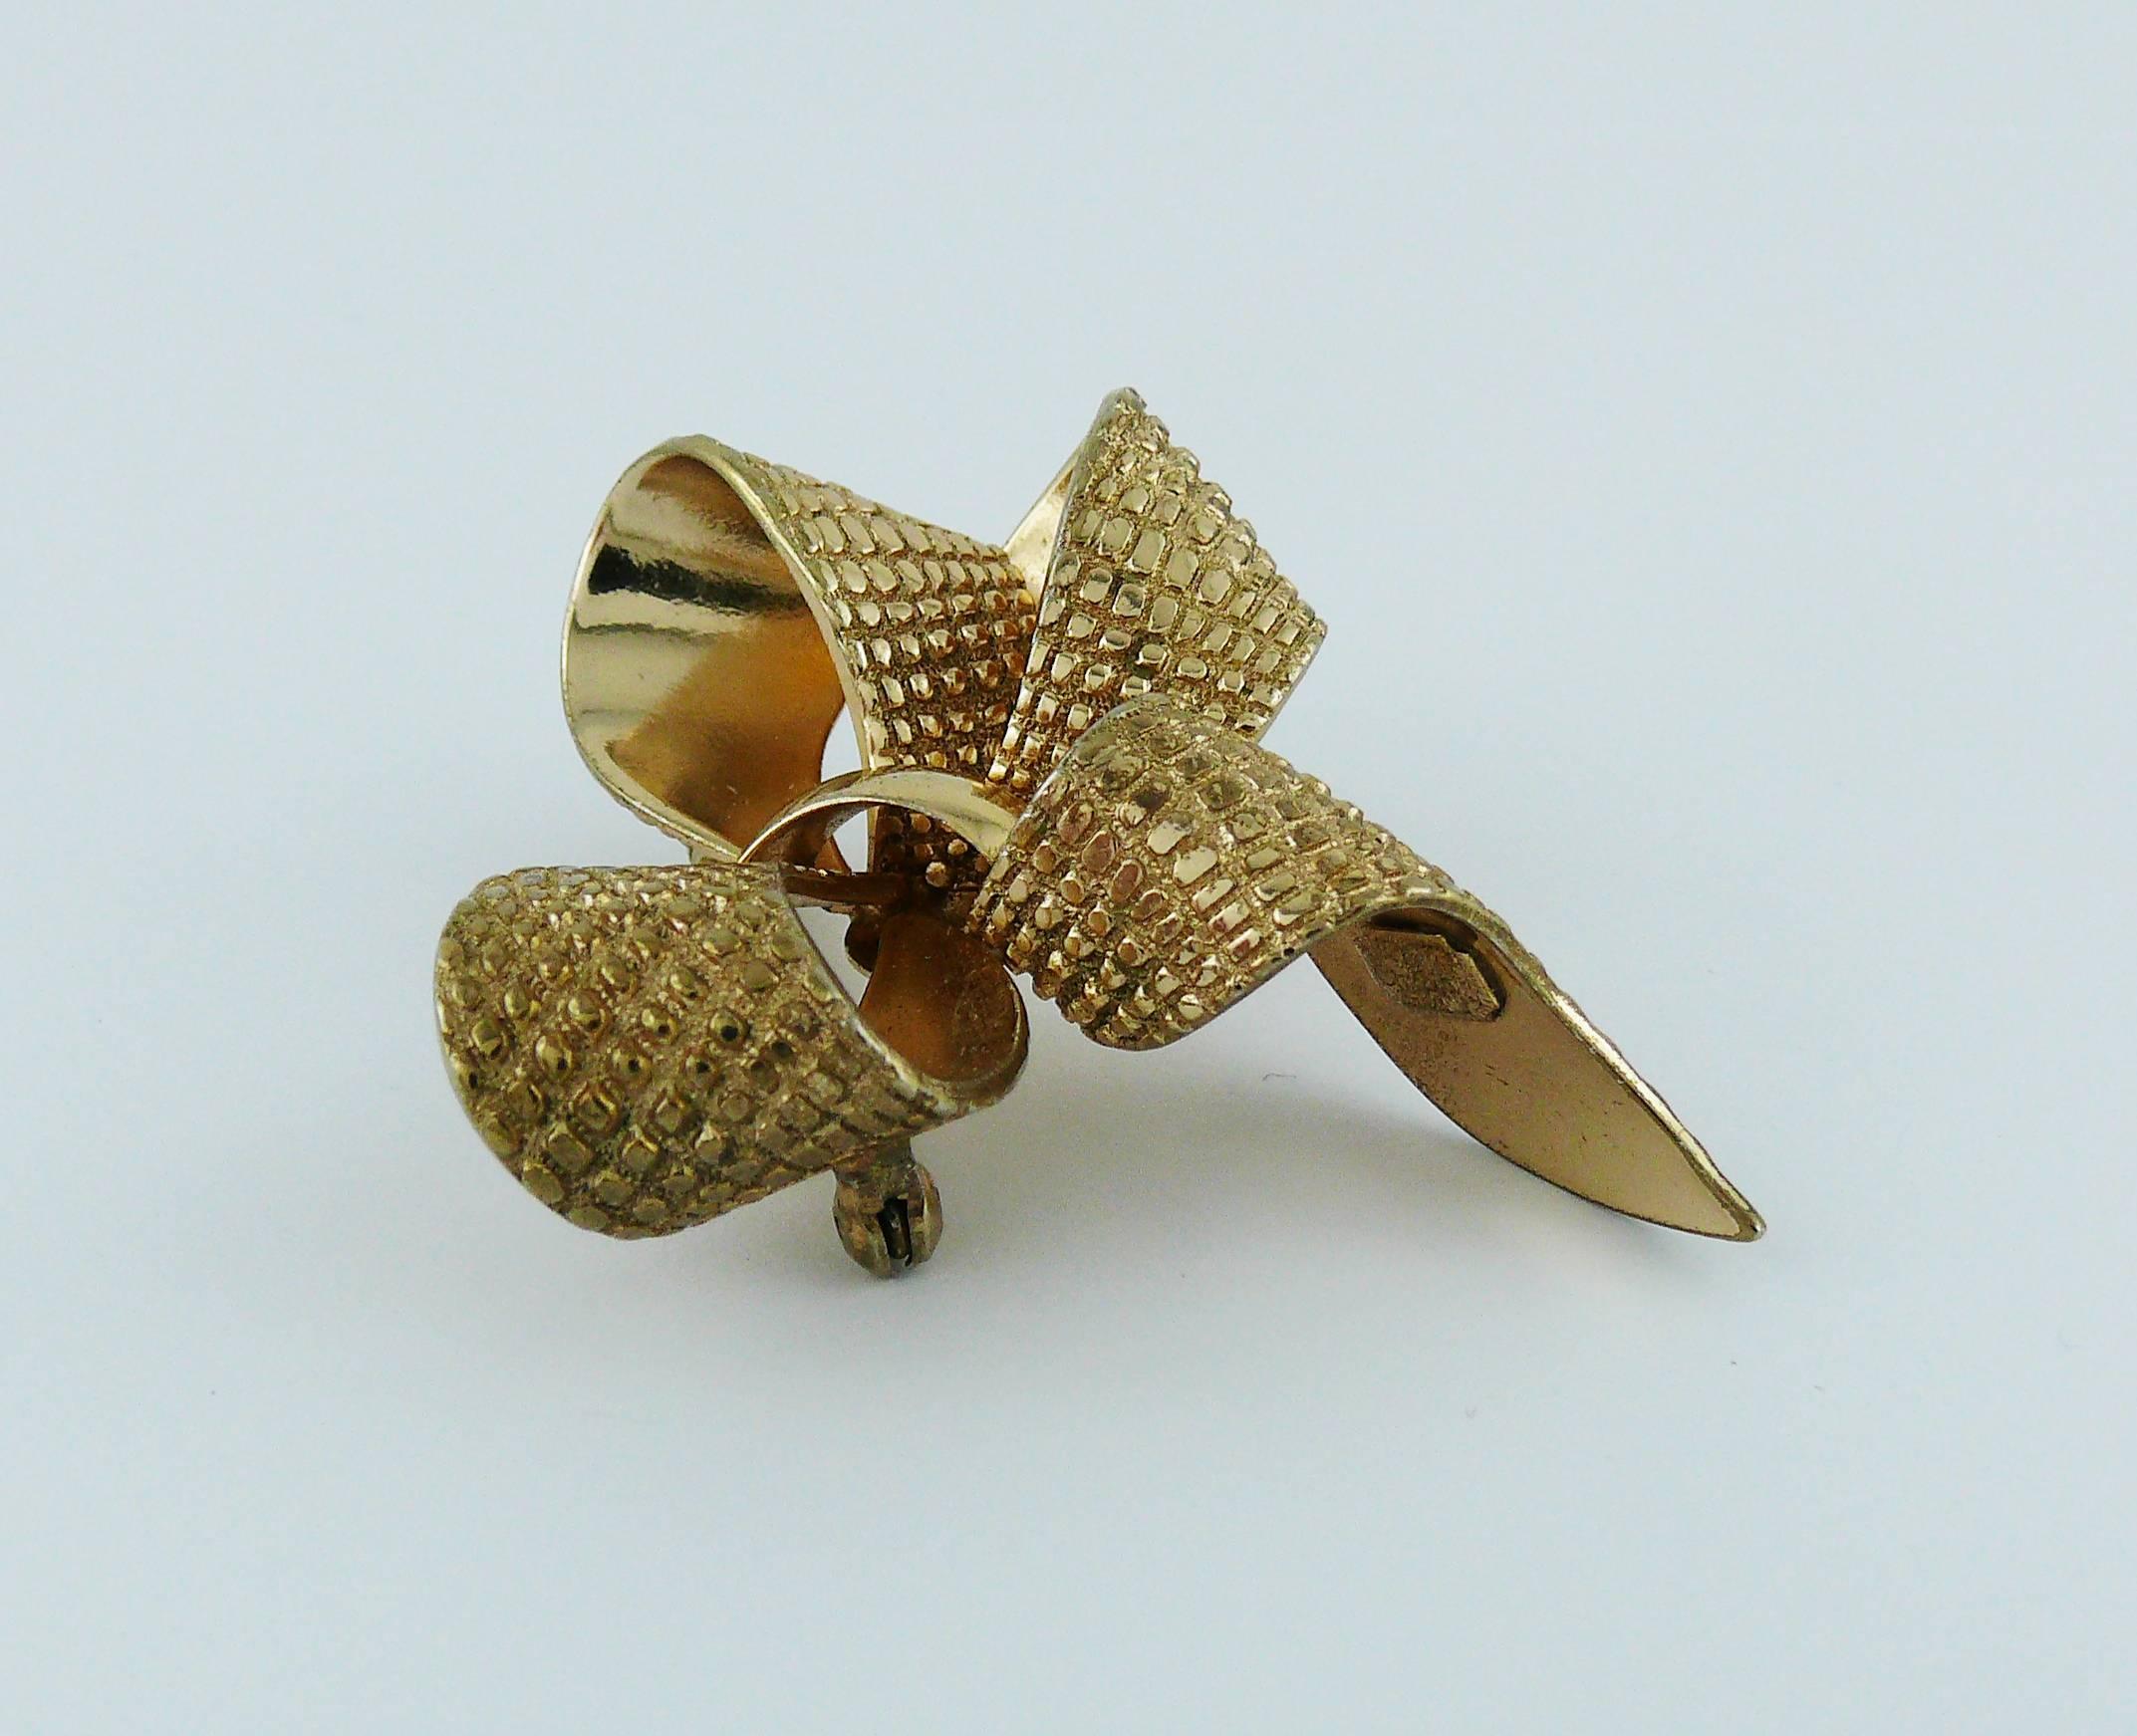 CHRISTIAN DIOR gold toned bow brooch.

Marked CHR. DIOR Germany.

Indicative measurements : approx 4.5 cm x 4 cm (1.77 inch x 1.57 inches).

JEWELRY CONDITION CHART
- New or never worn : item is in pristine condition with no noticeable